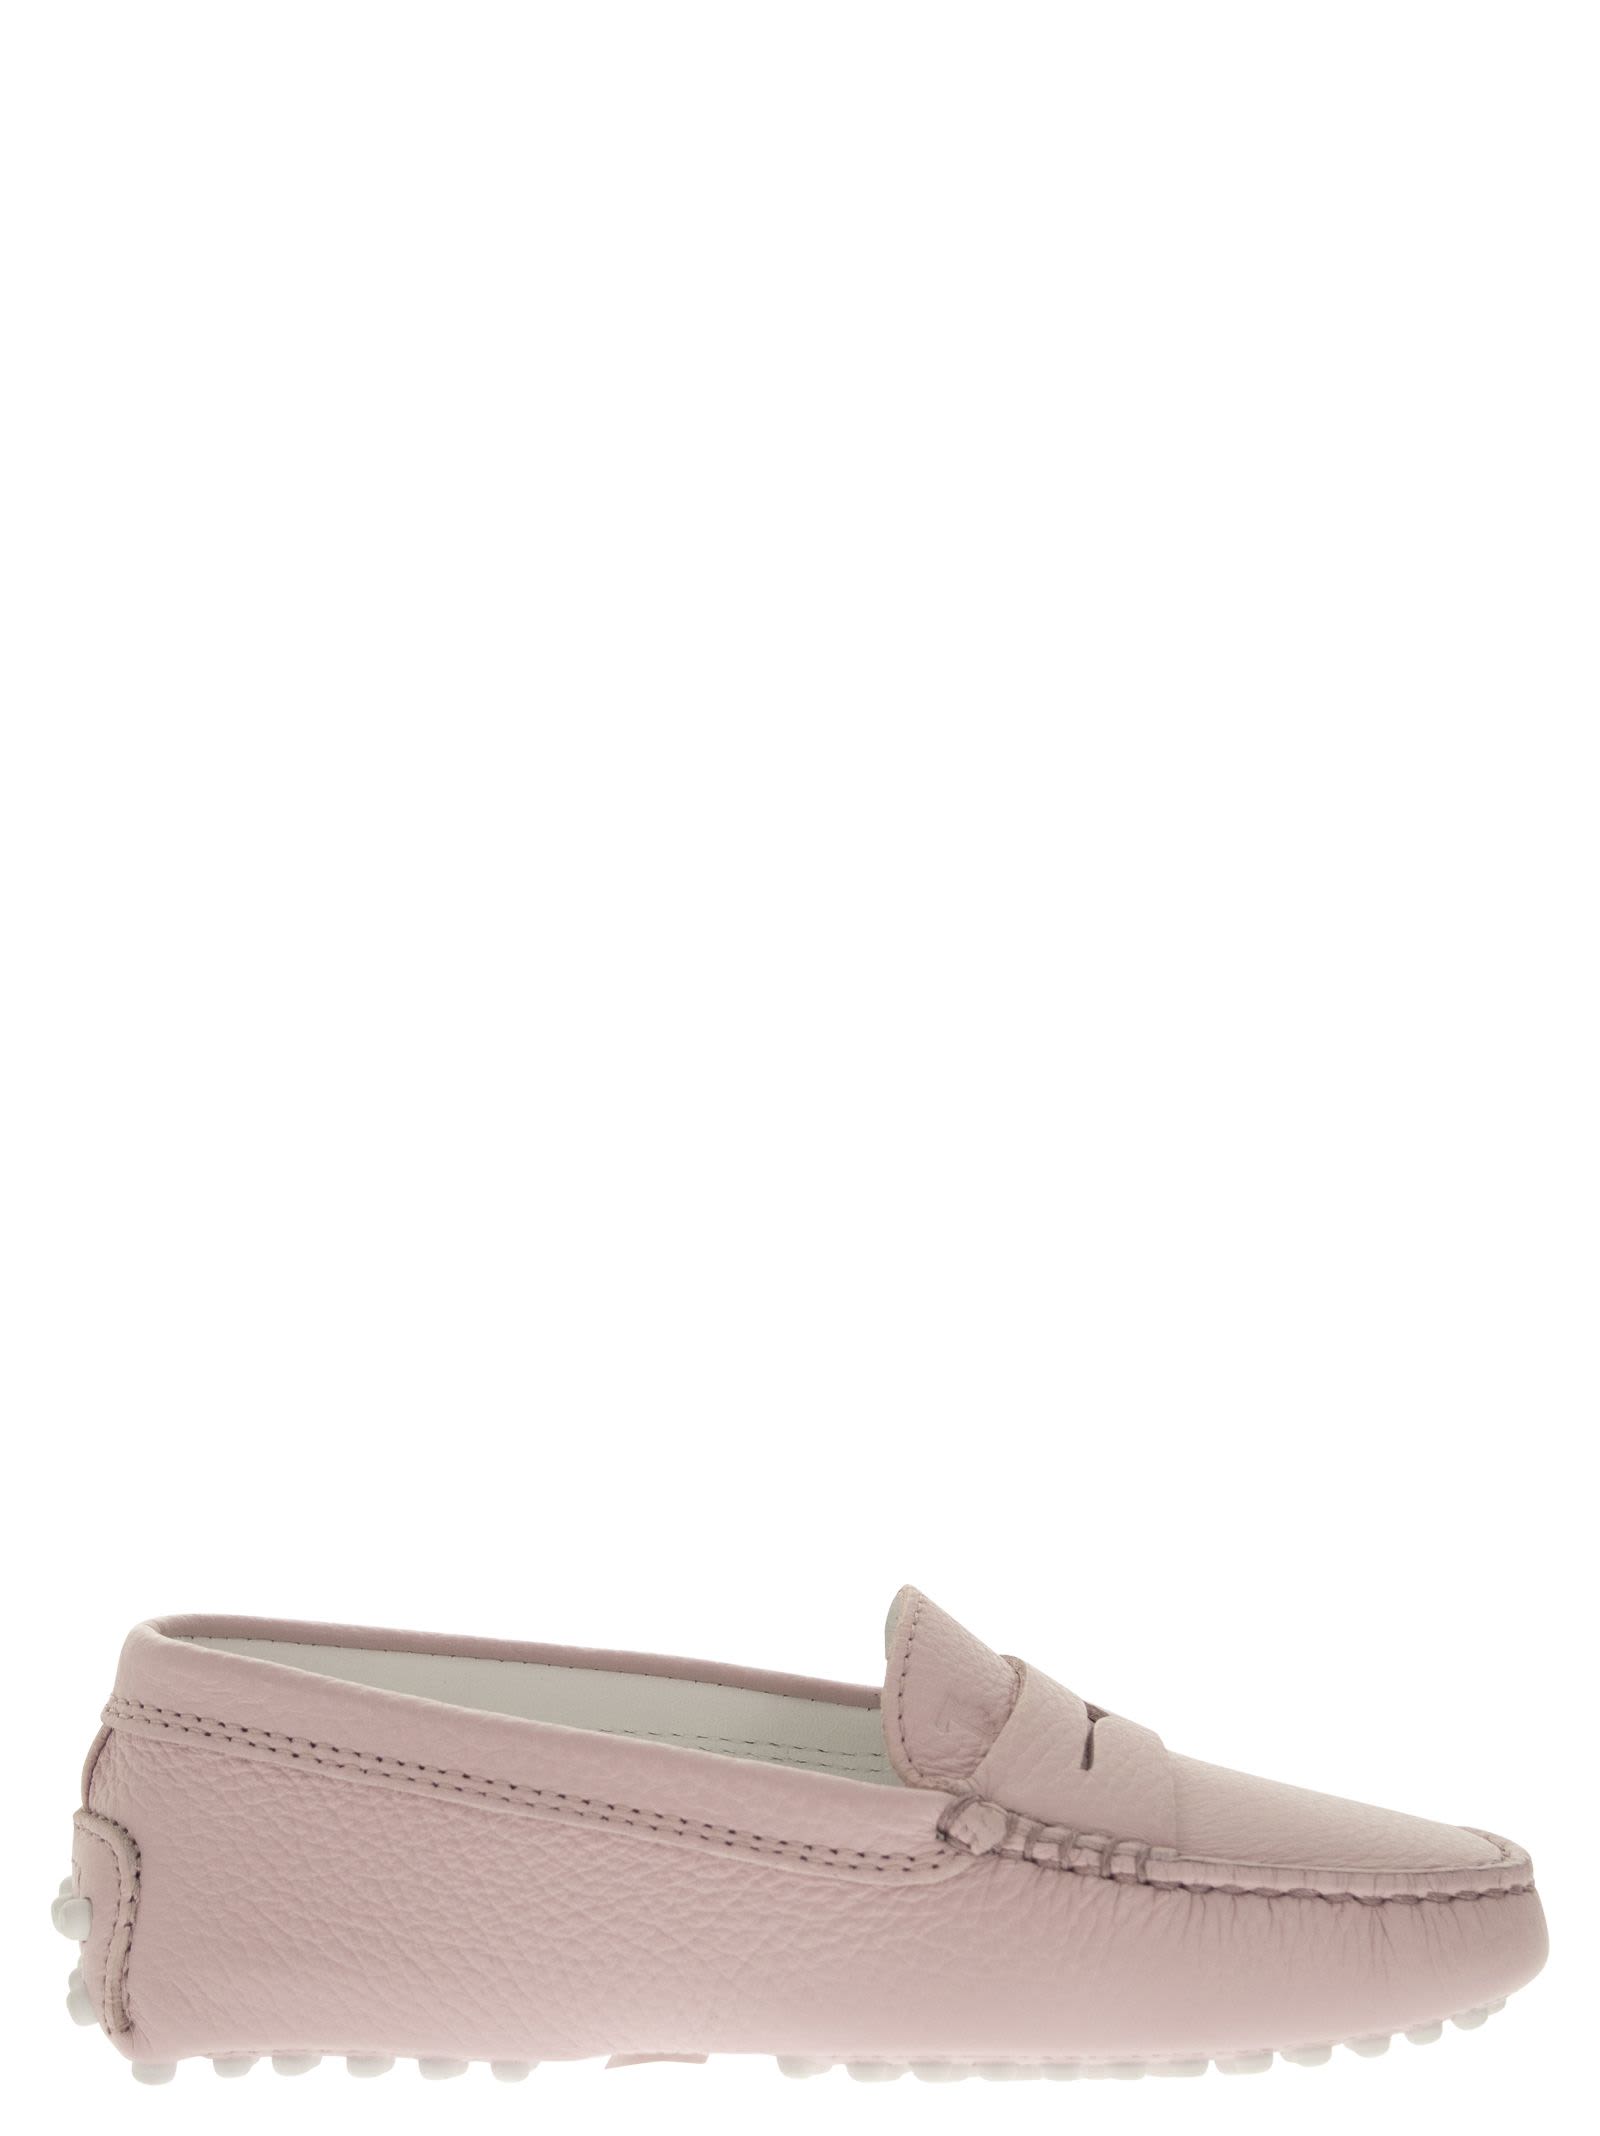 TOD'S GOMMINO LEATHER LOAFER